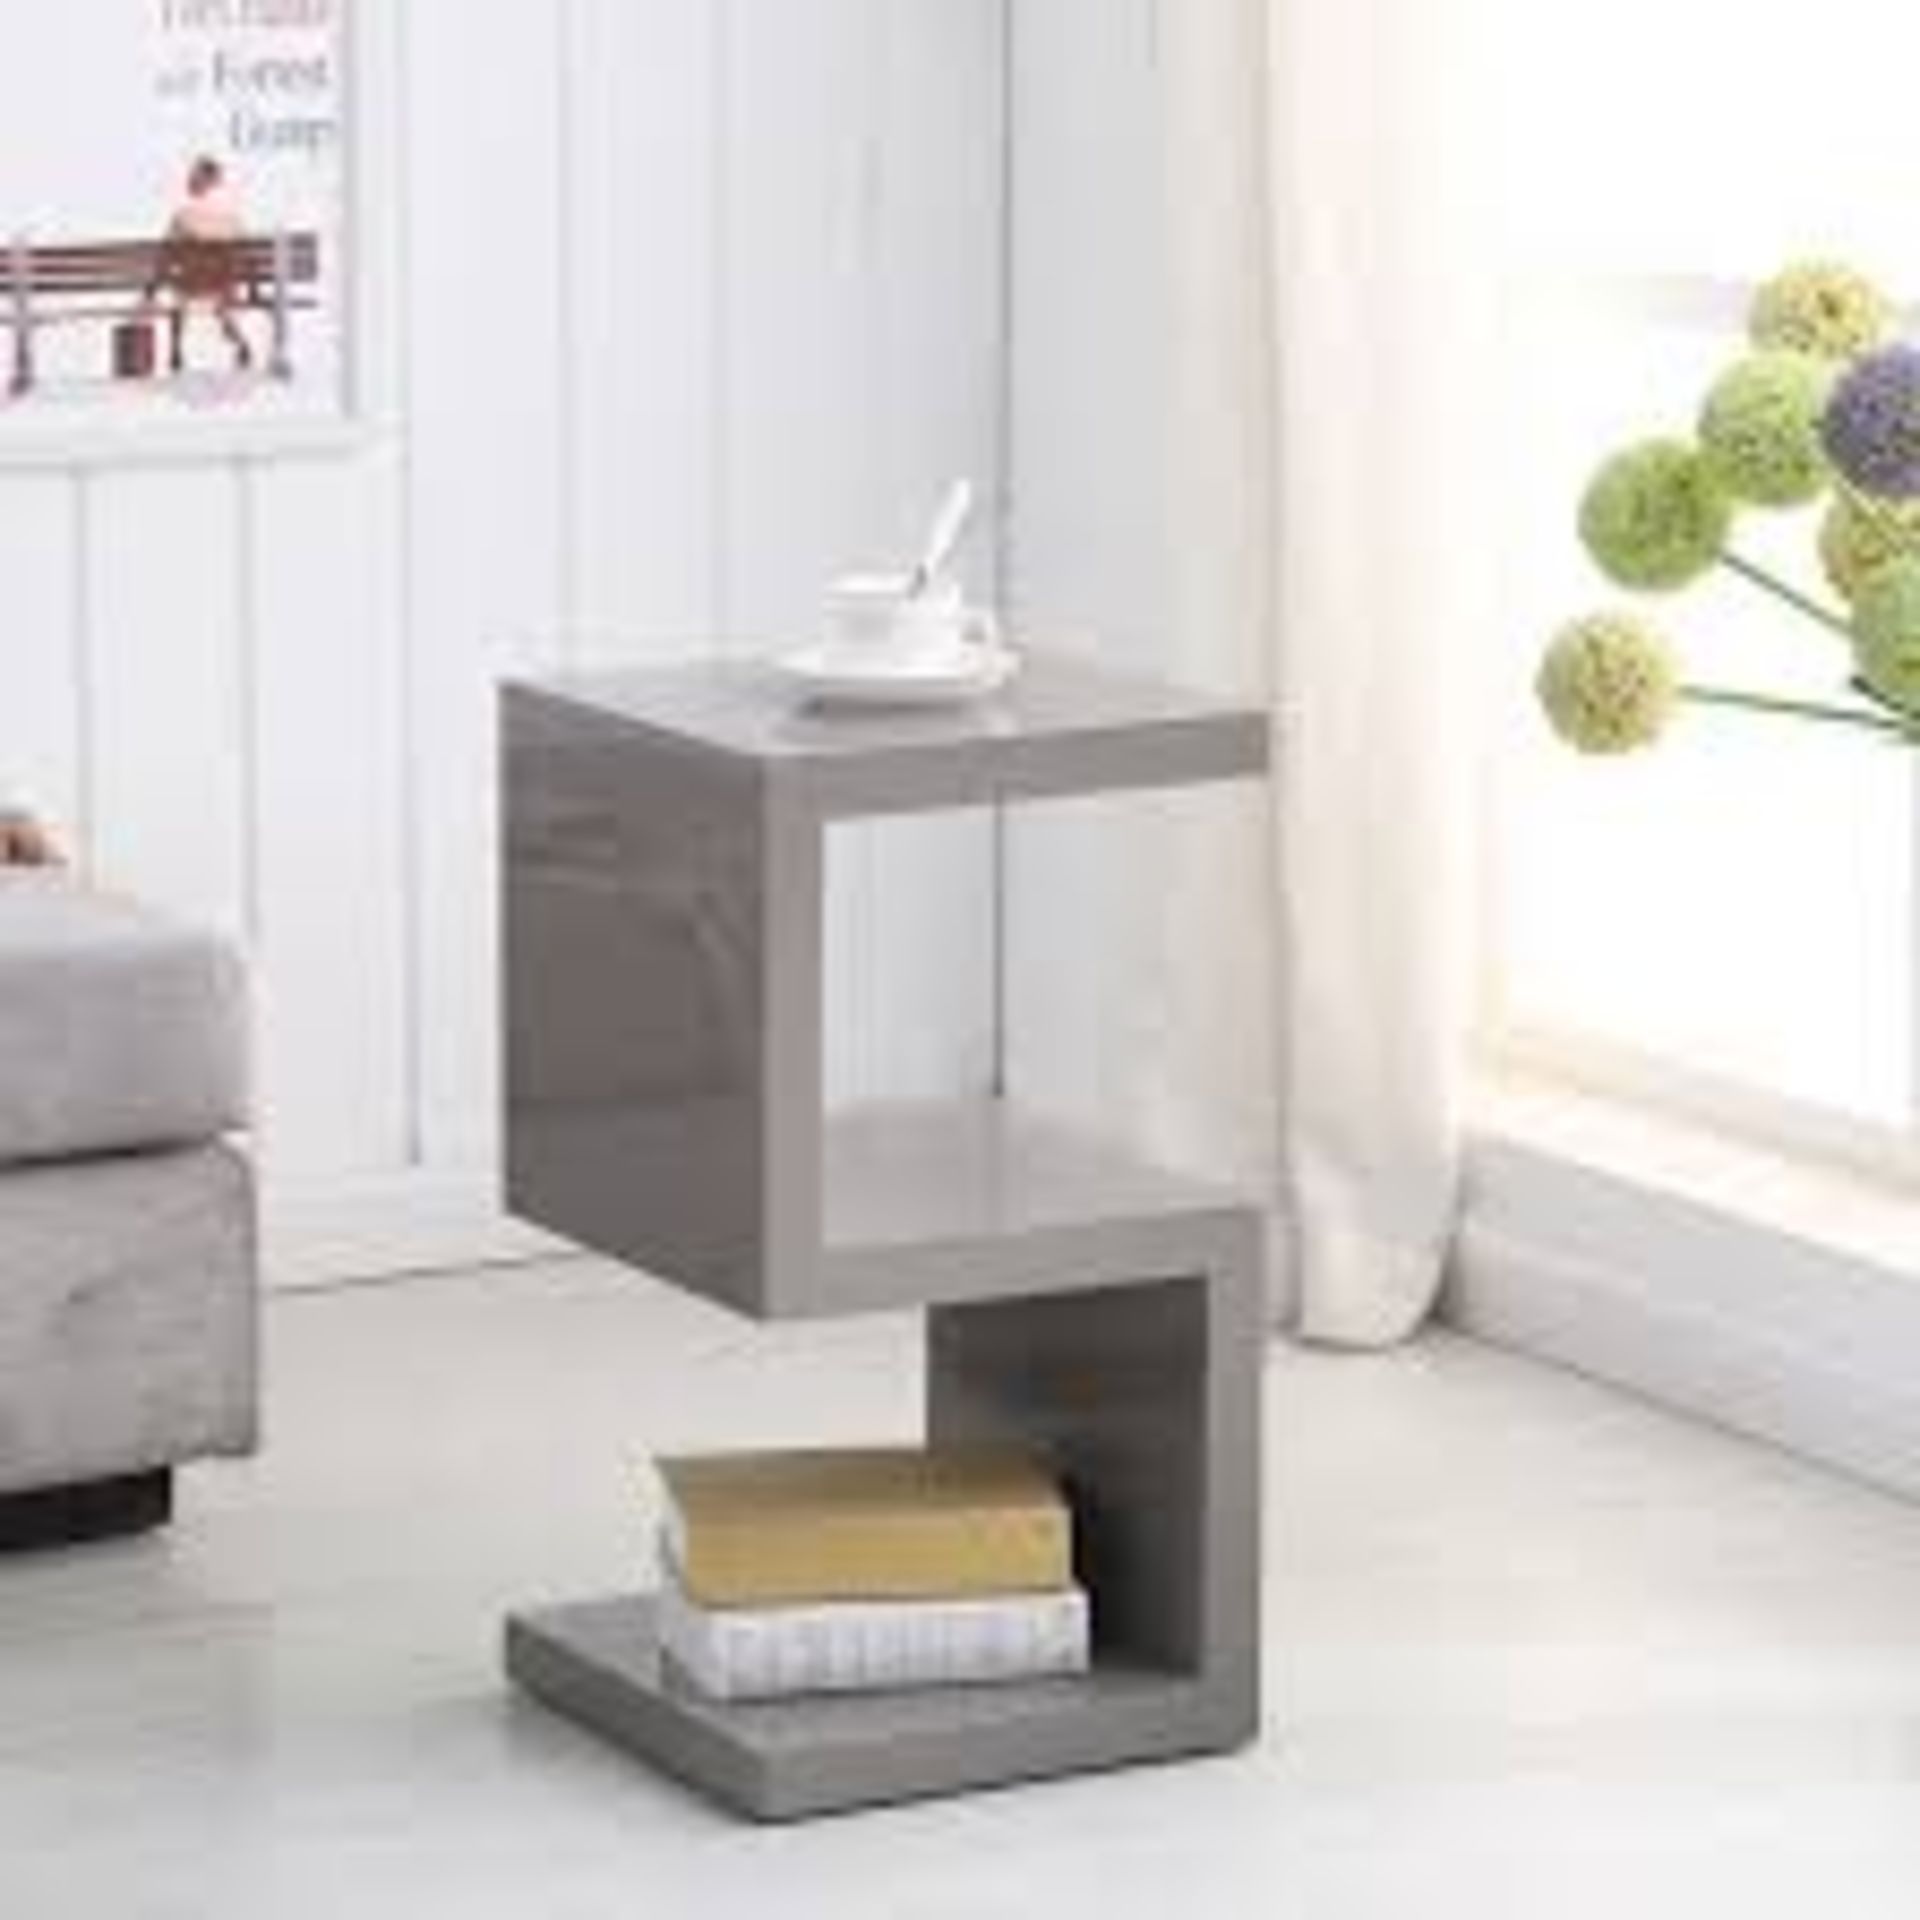 Boxed White High Gloss 33 x 33 x 59cm S Shape Side Table RRP £130 (Pictures Are For Illustration